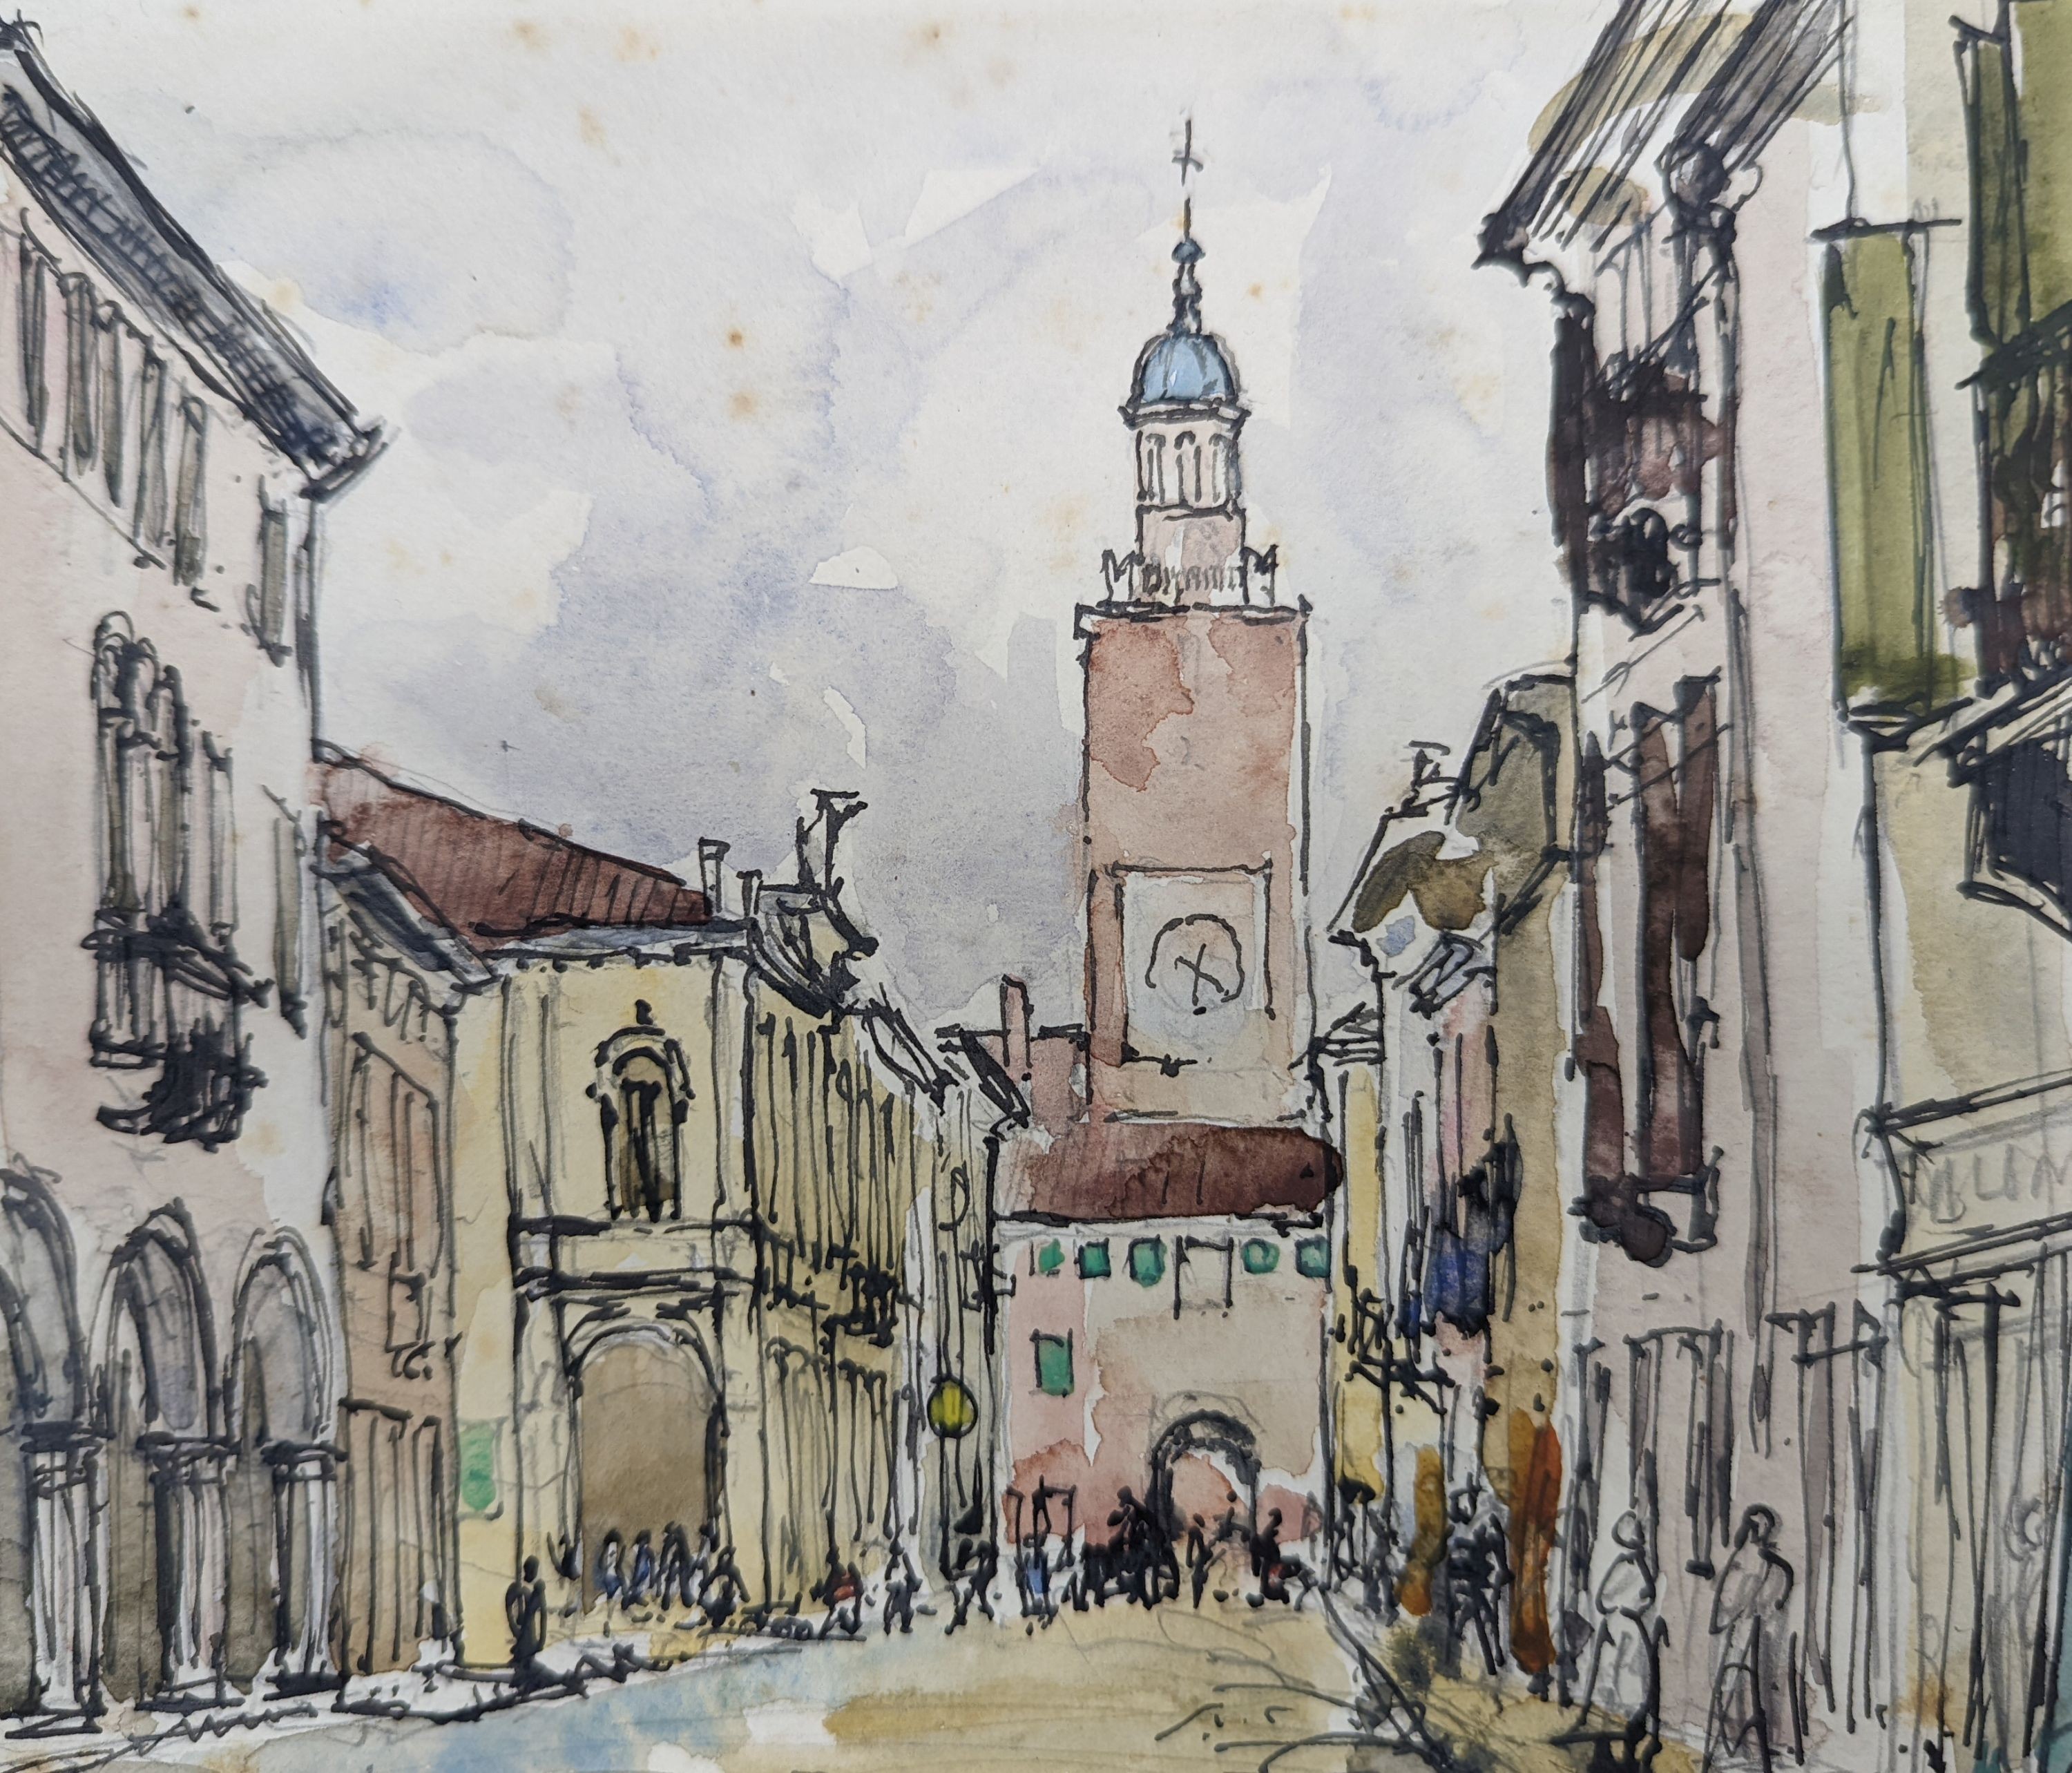 Lord Methuen RA, (1886-1974), watercolour, 'Castelfranco, Veneto', signed and dated August '35, 17 x 20cm. unframed.